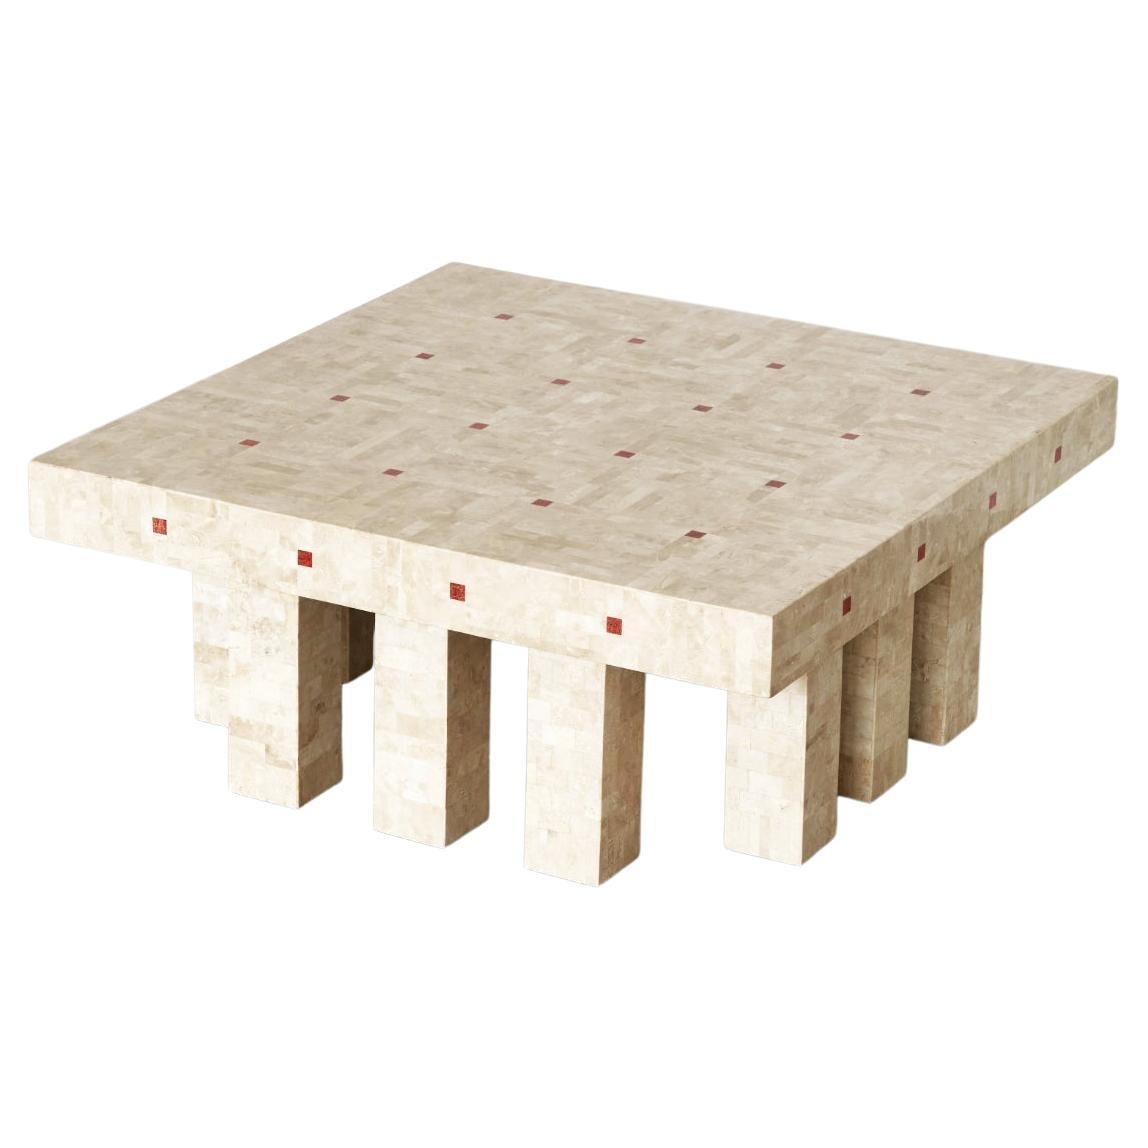 Architectural Belgian Coffee Table in Travertine